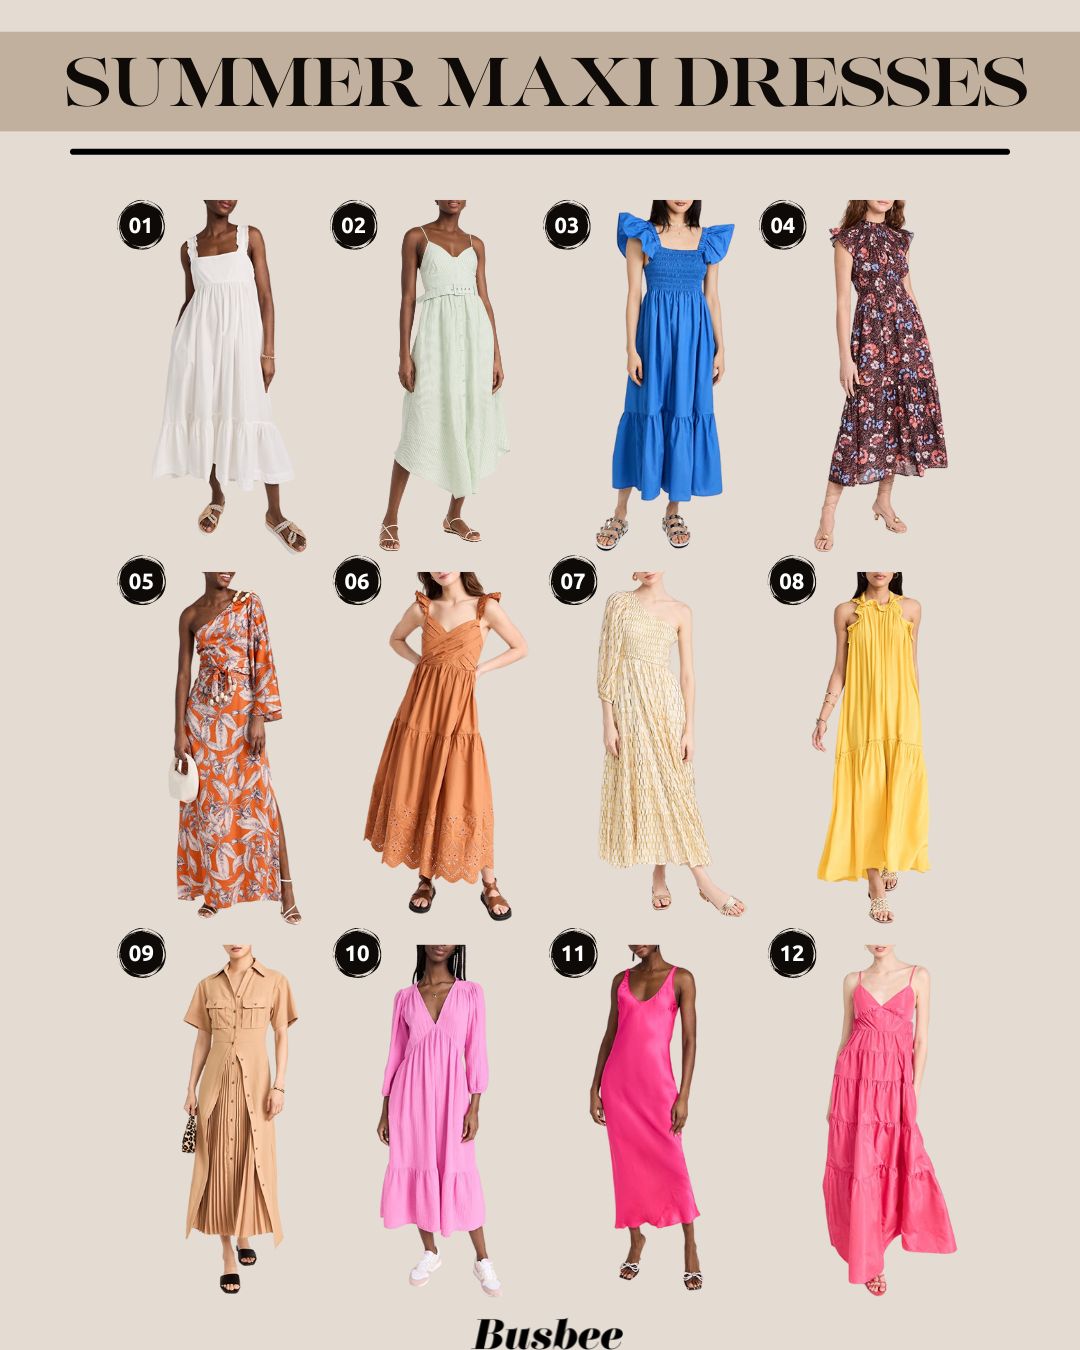 maxi dresses for summer, maxi dresses for spring, maxi dresses for women over 40, maxi dresses for women, chic maxi dresses, maxi dresses for vacation, maxi dresses to hide a tummy, chic maxi dresses, erin busbee, busbee style, fashion over 40